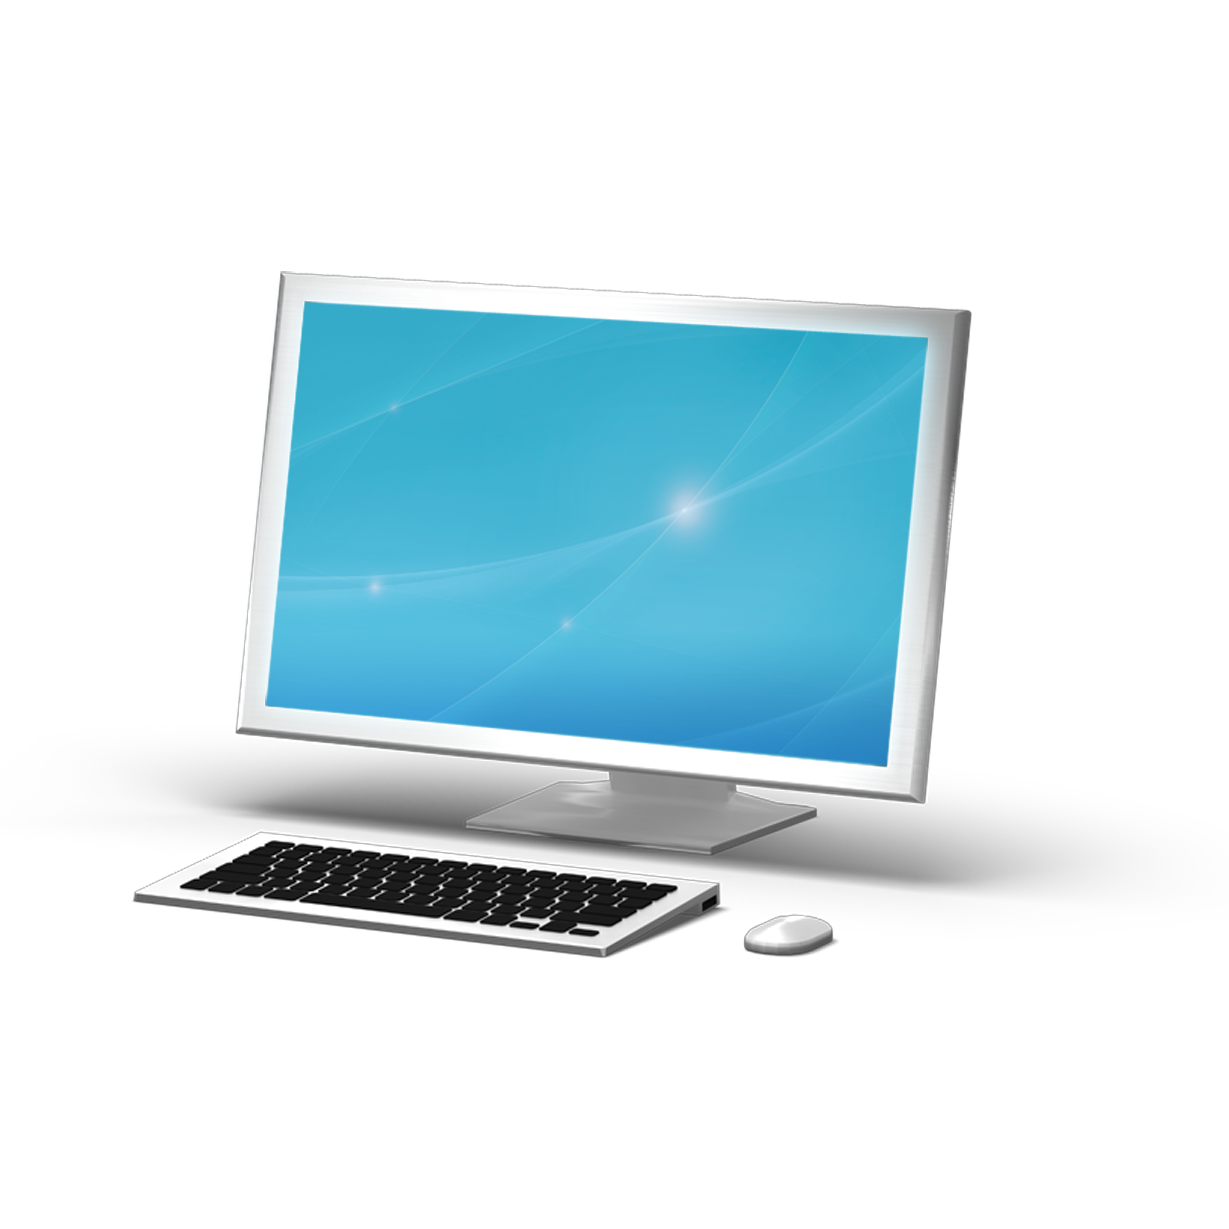 Computer PC Free PNG Image